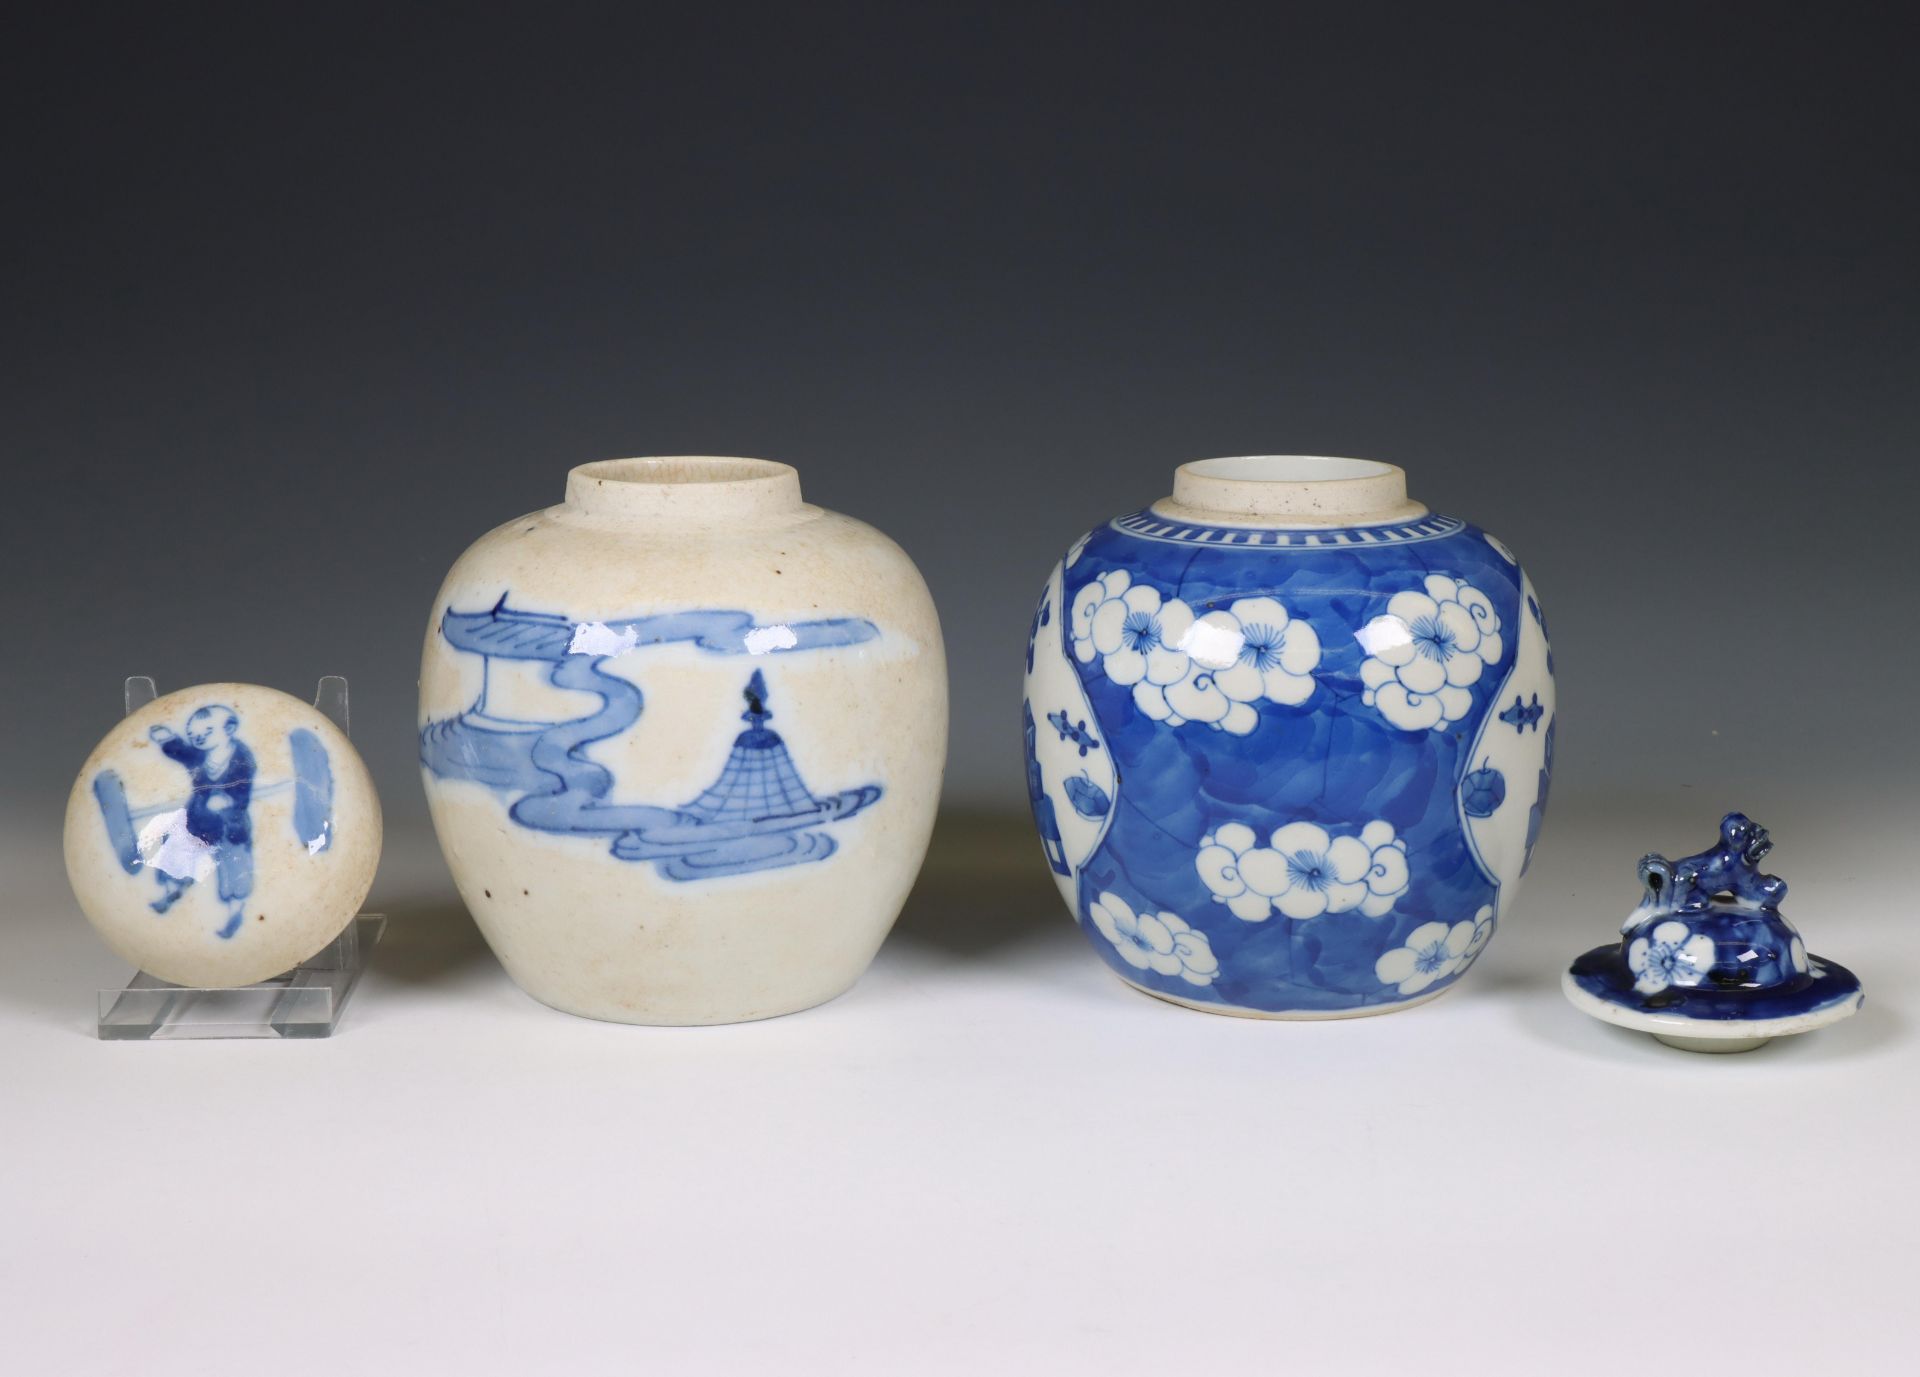 China, two blue and white porcelain ginger jars and covers, 19th-20th century, - Image 3 of 3